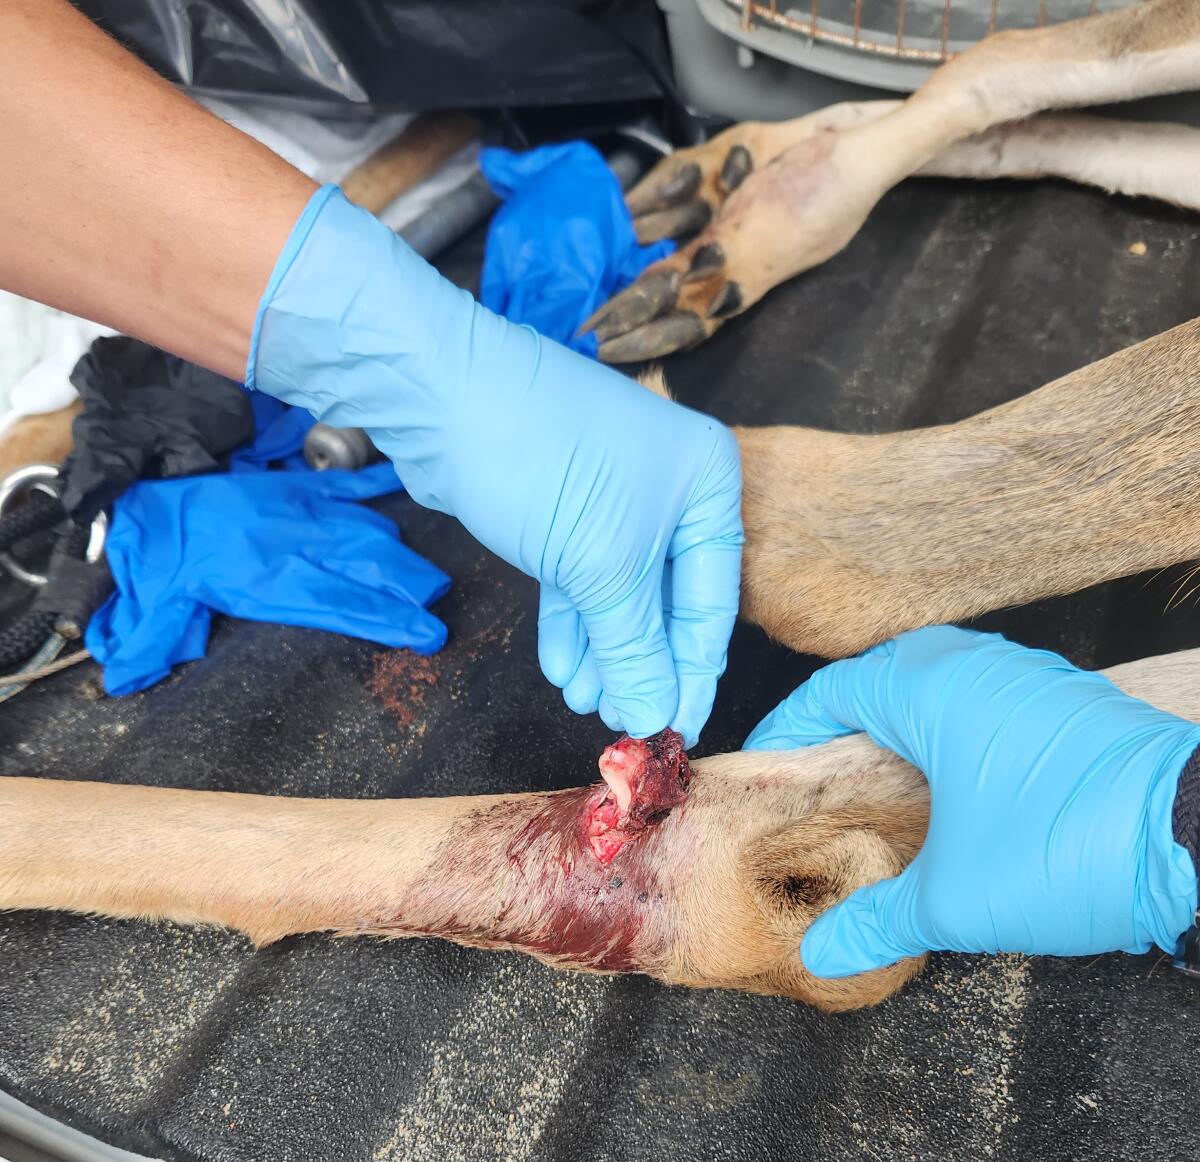 A deer, found Saturday with a compound leg fracture, was humanely euthanized by wildlife officials later that day.